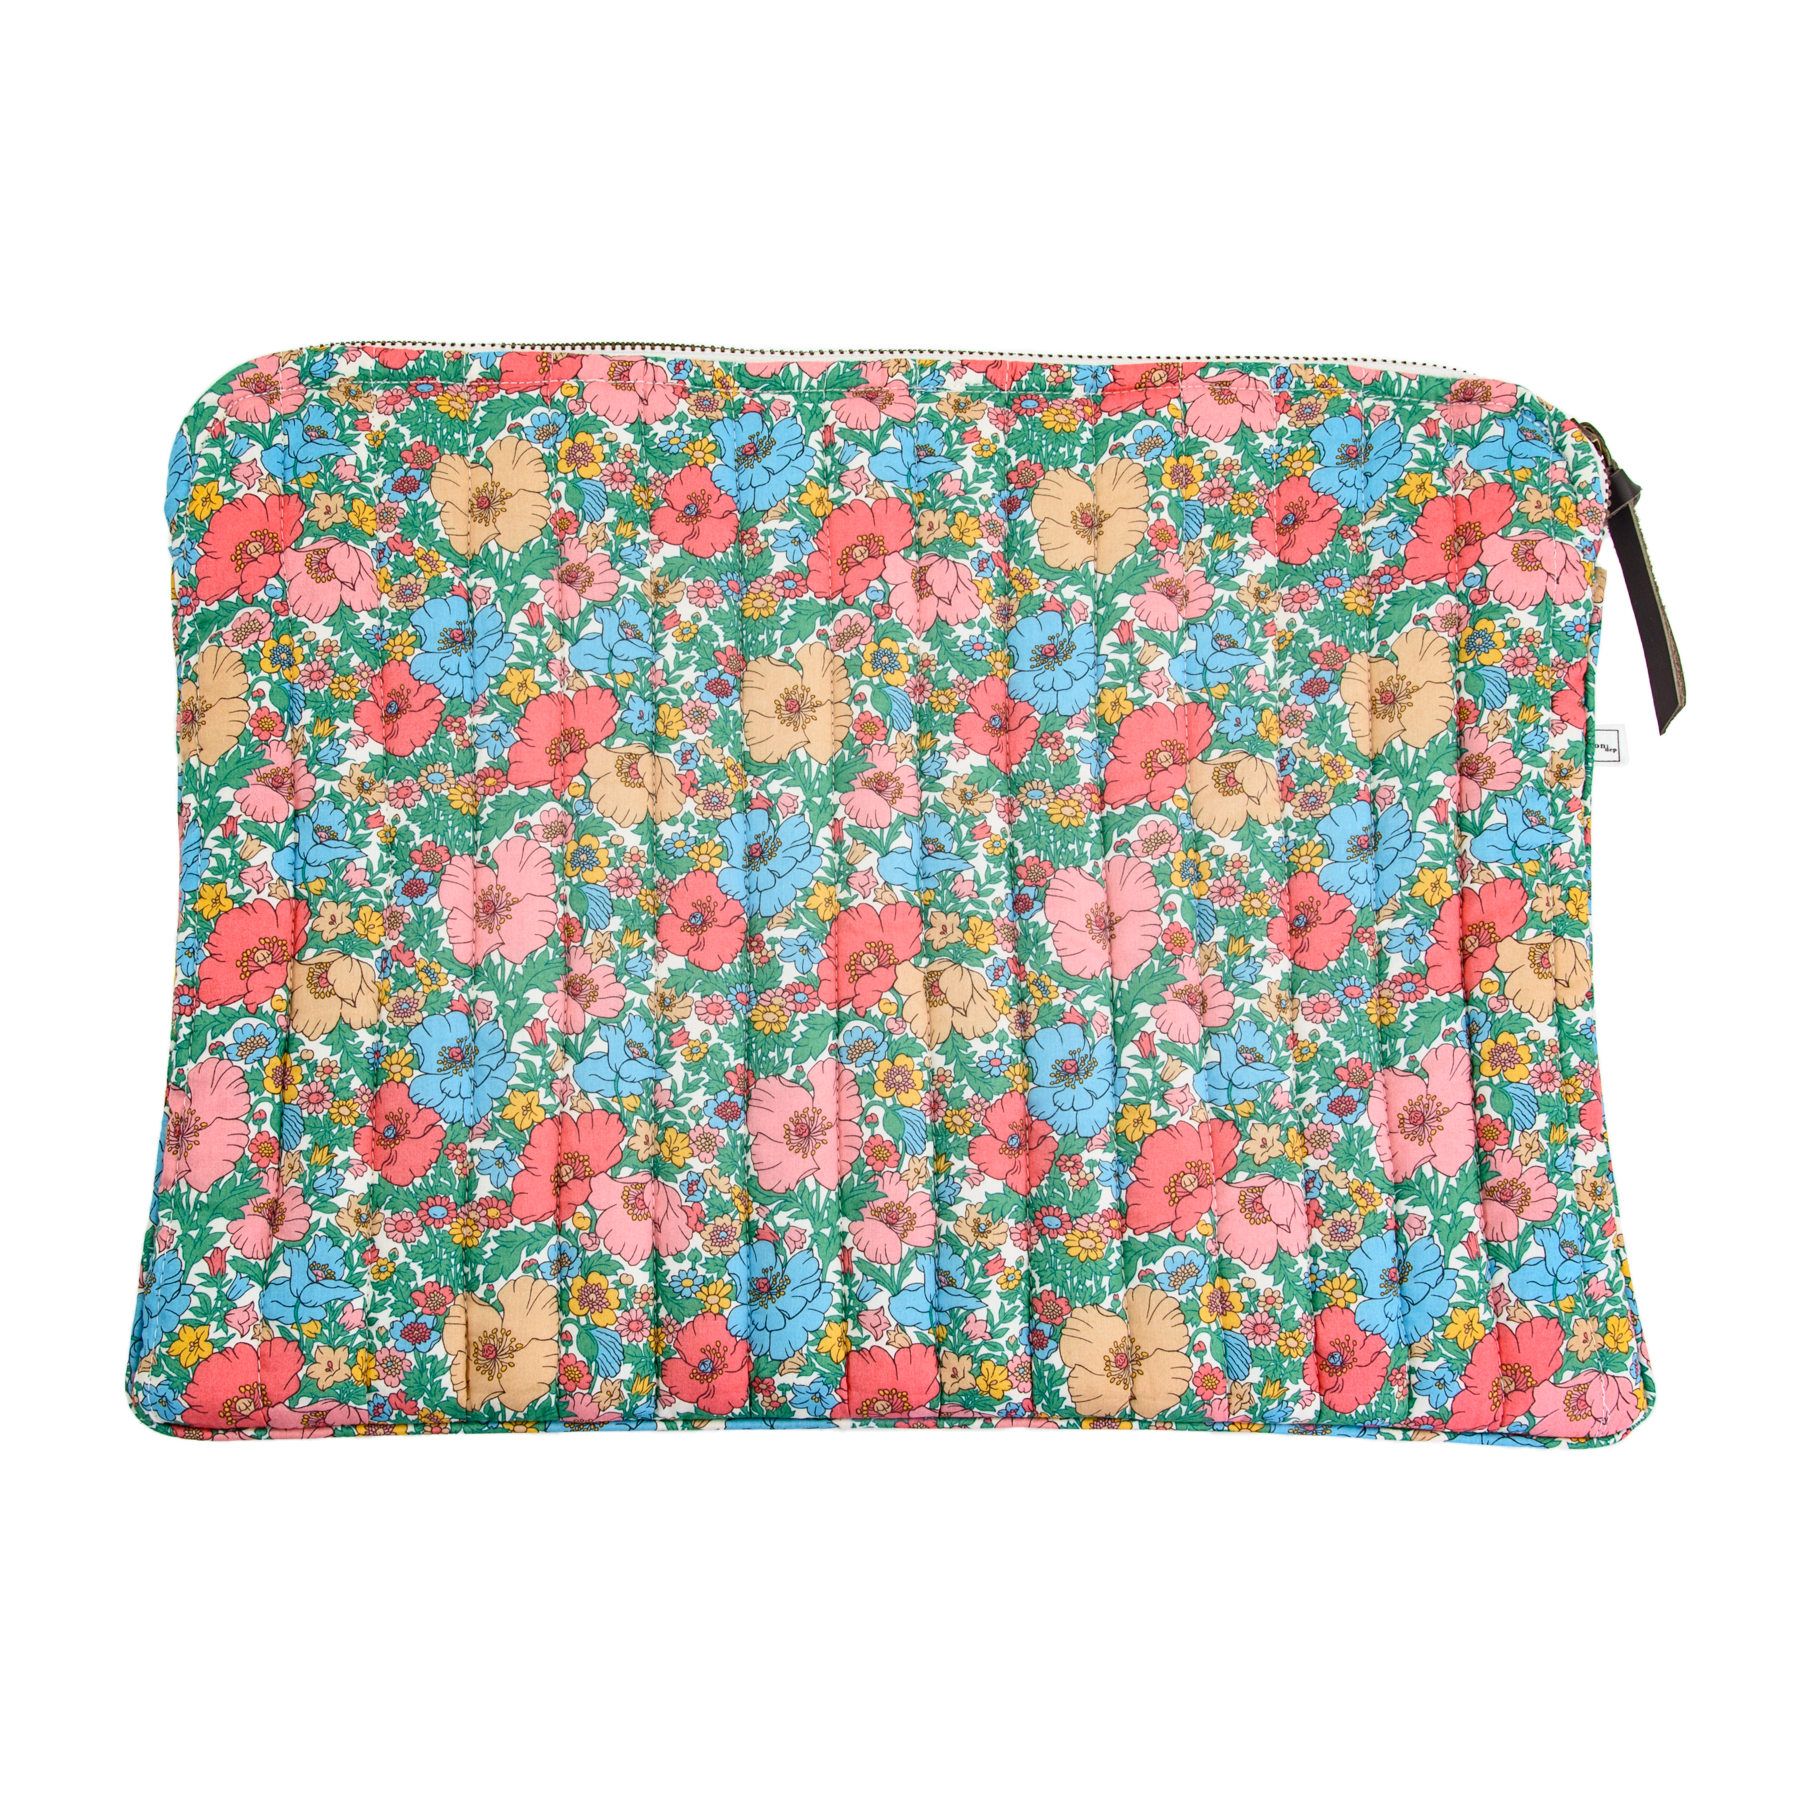 MAC COVER MW LIBERTY FABRIC MEADOW SONG PEACH